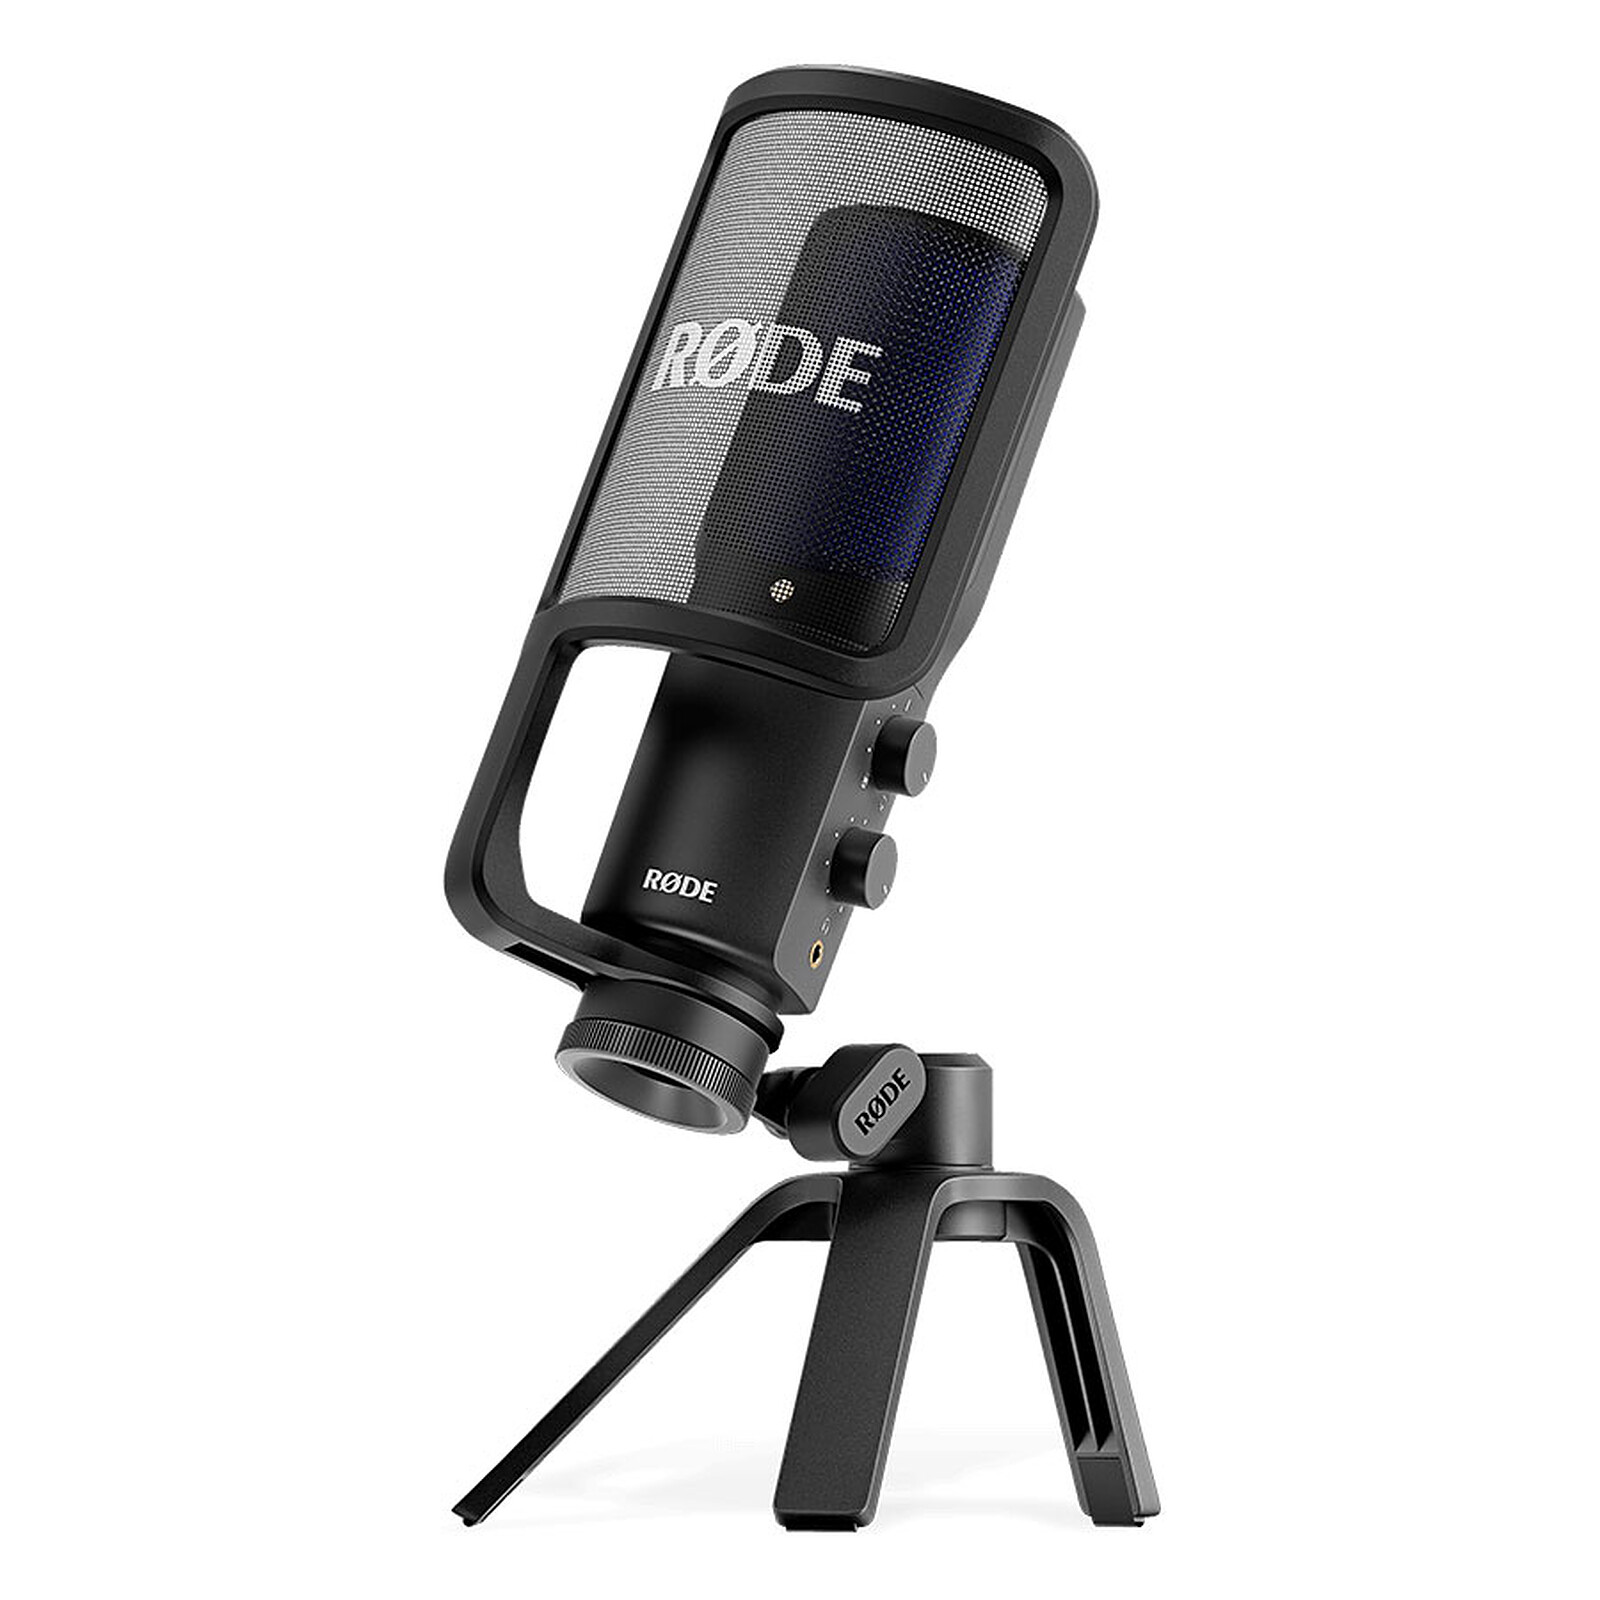 RODE NT-USB+ - Microphone - LDLC 3-year warranty